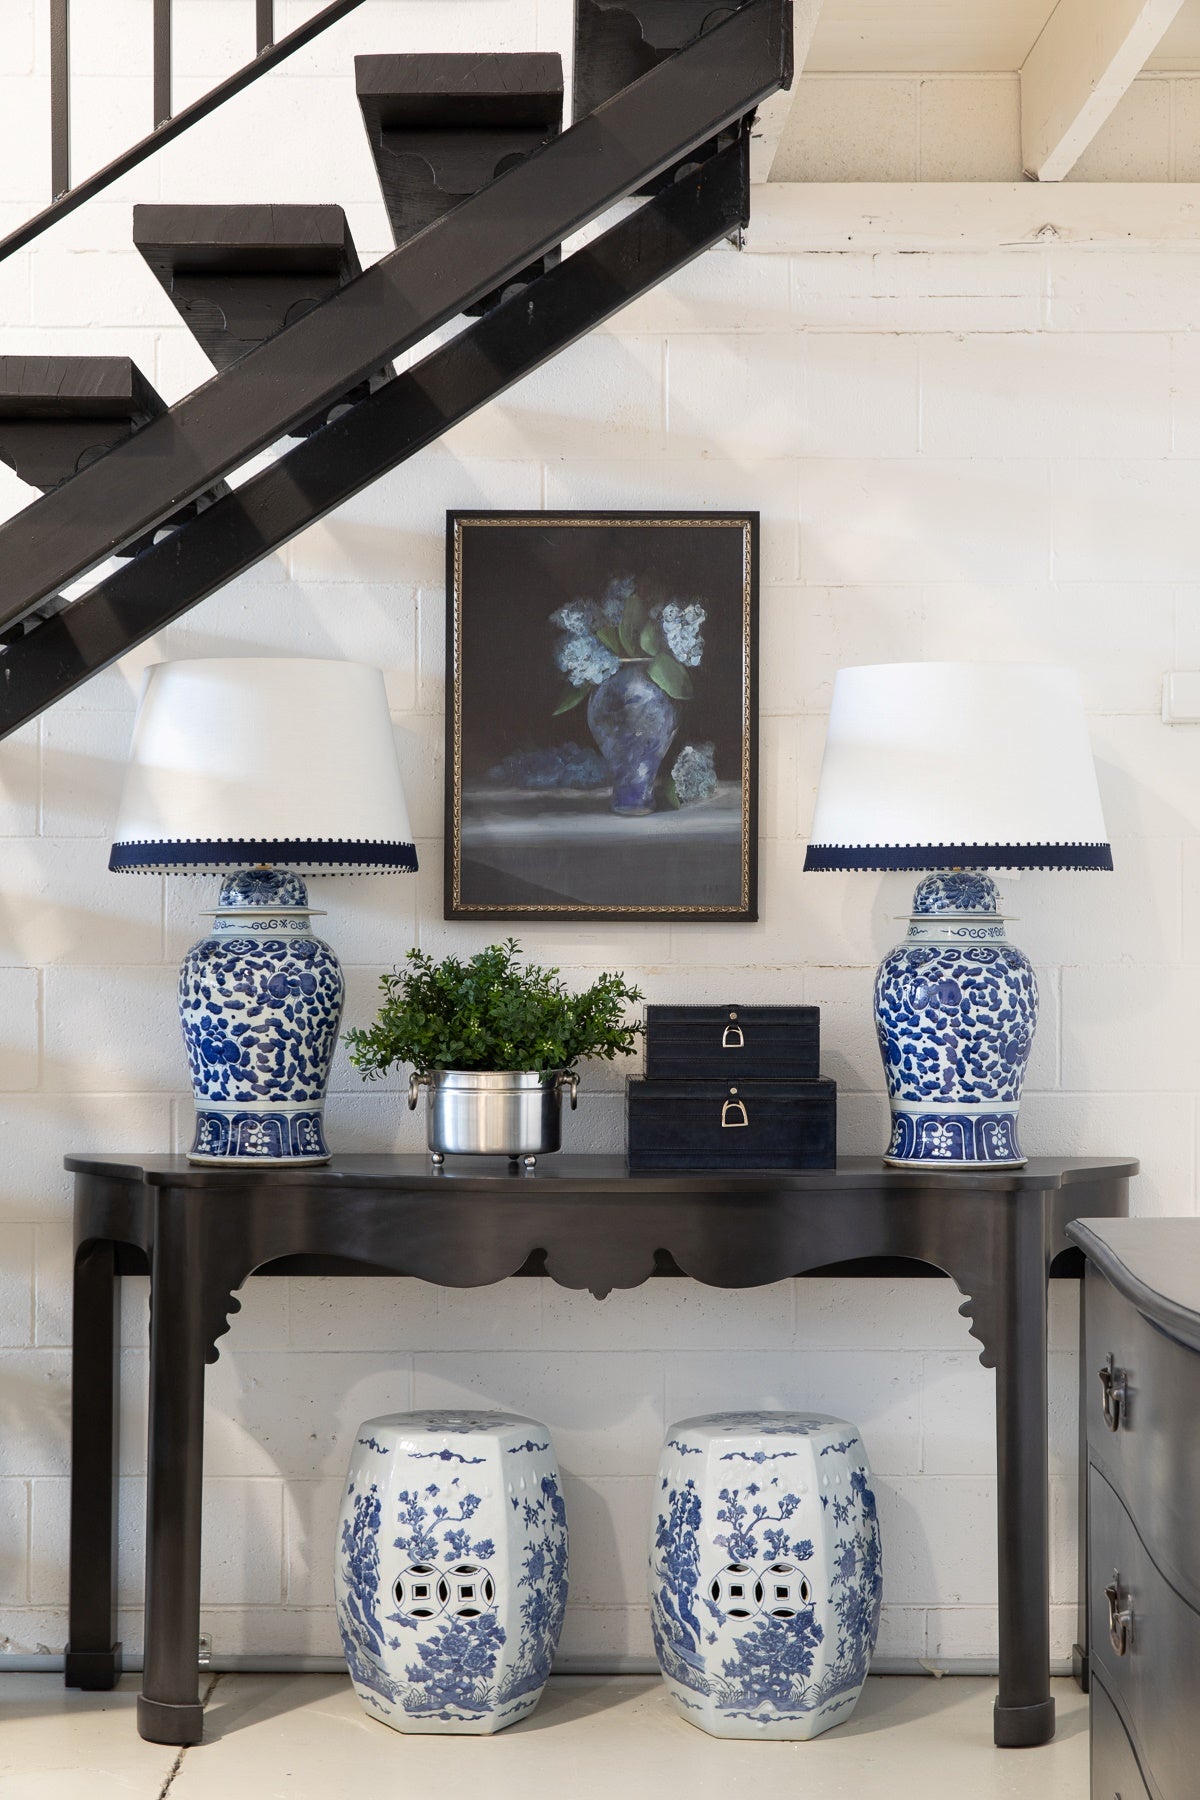 4 leg dark console table in entryway styled with blue lamps, boxes and a pot plant